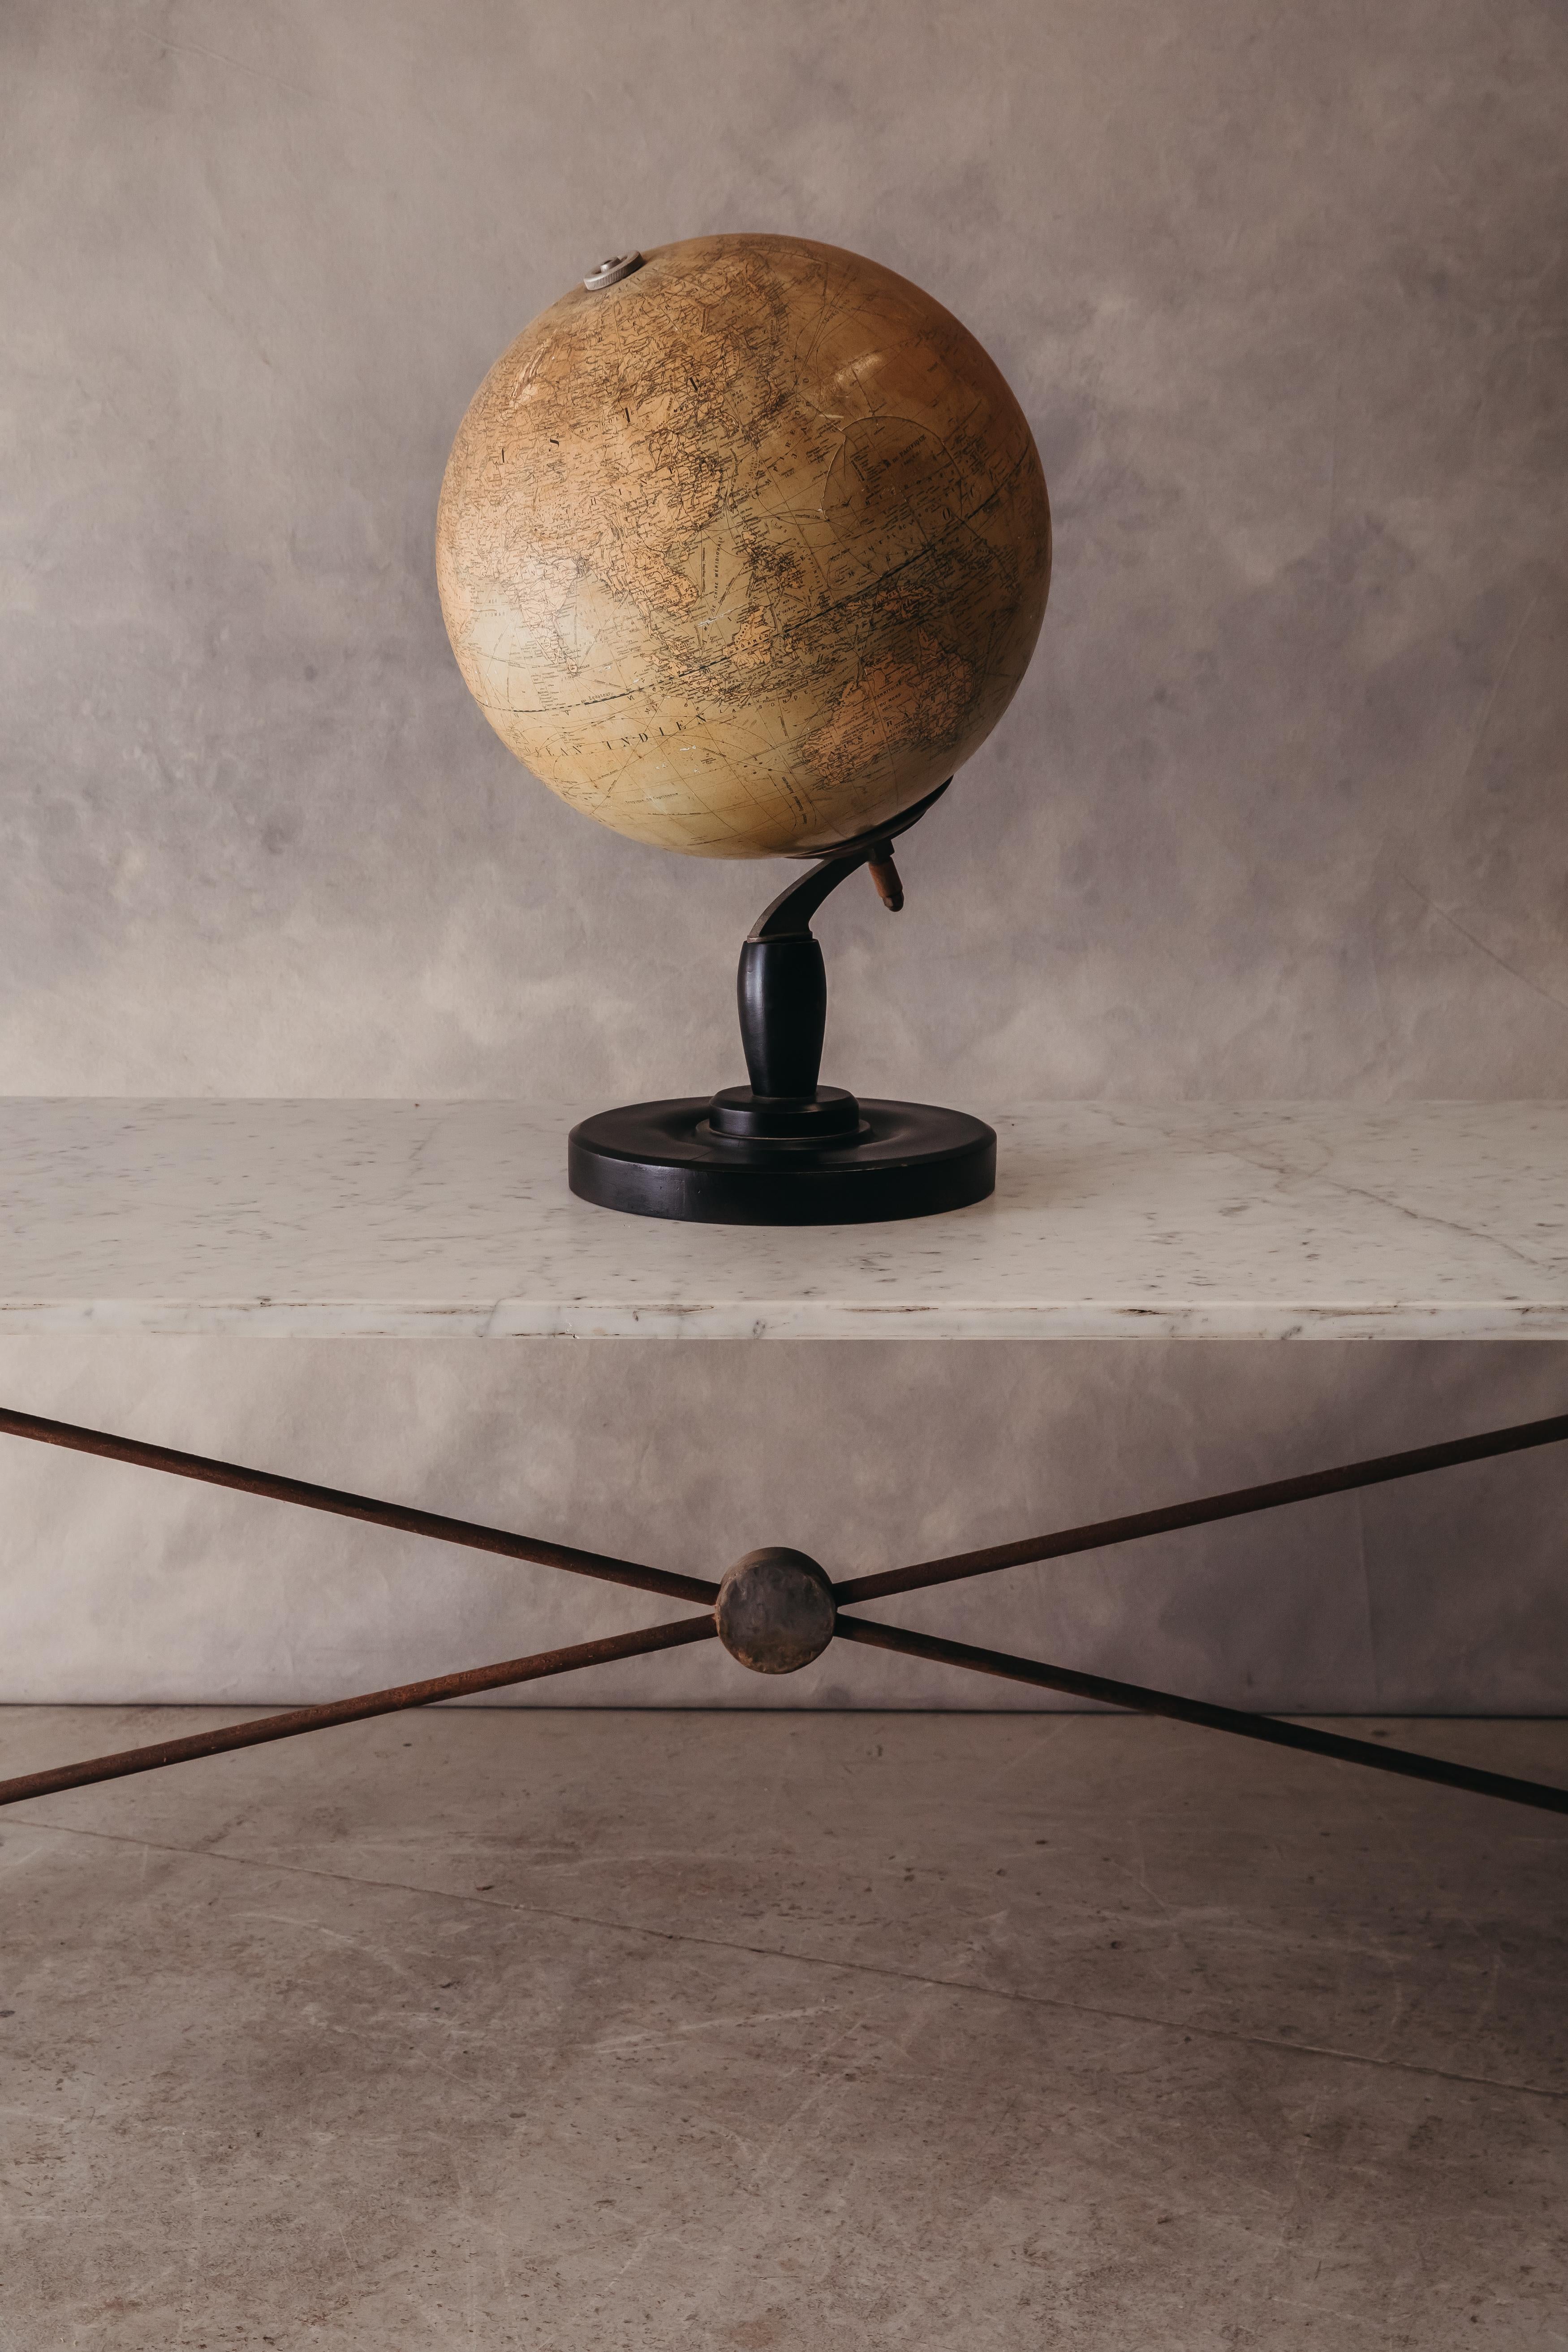 Vintage XL Globe From France, Circa 1950. Unusually large model with fantastic age and patina.